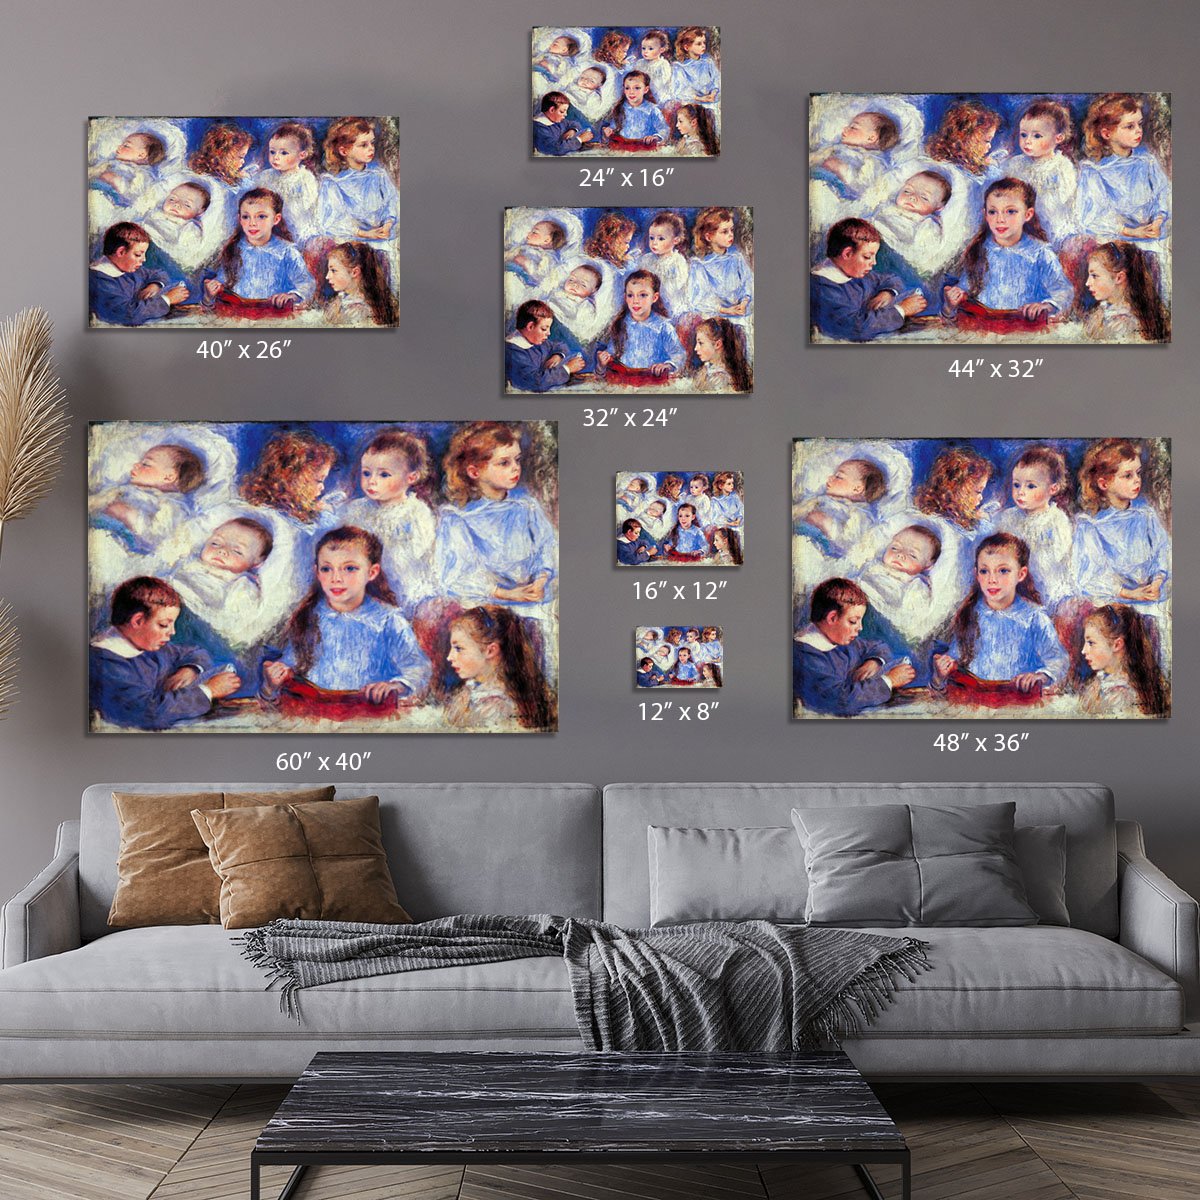 Images of childrens character heads by Renoir Canvas Print or Poster